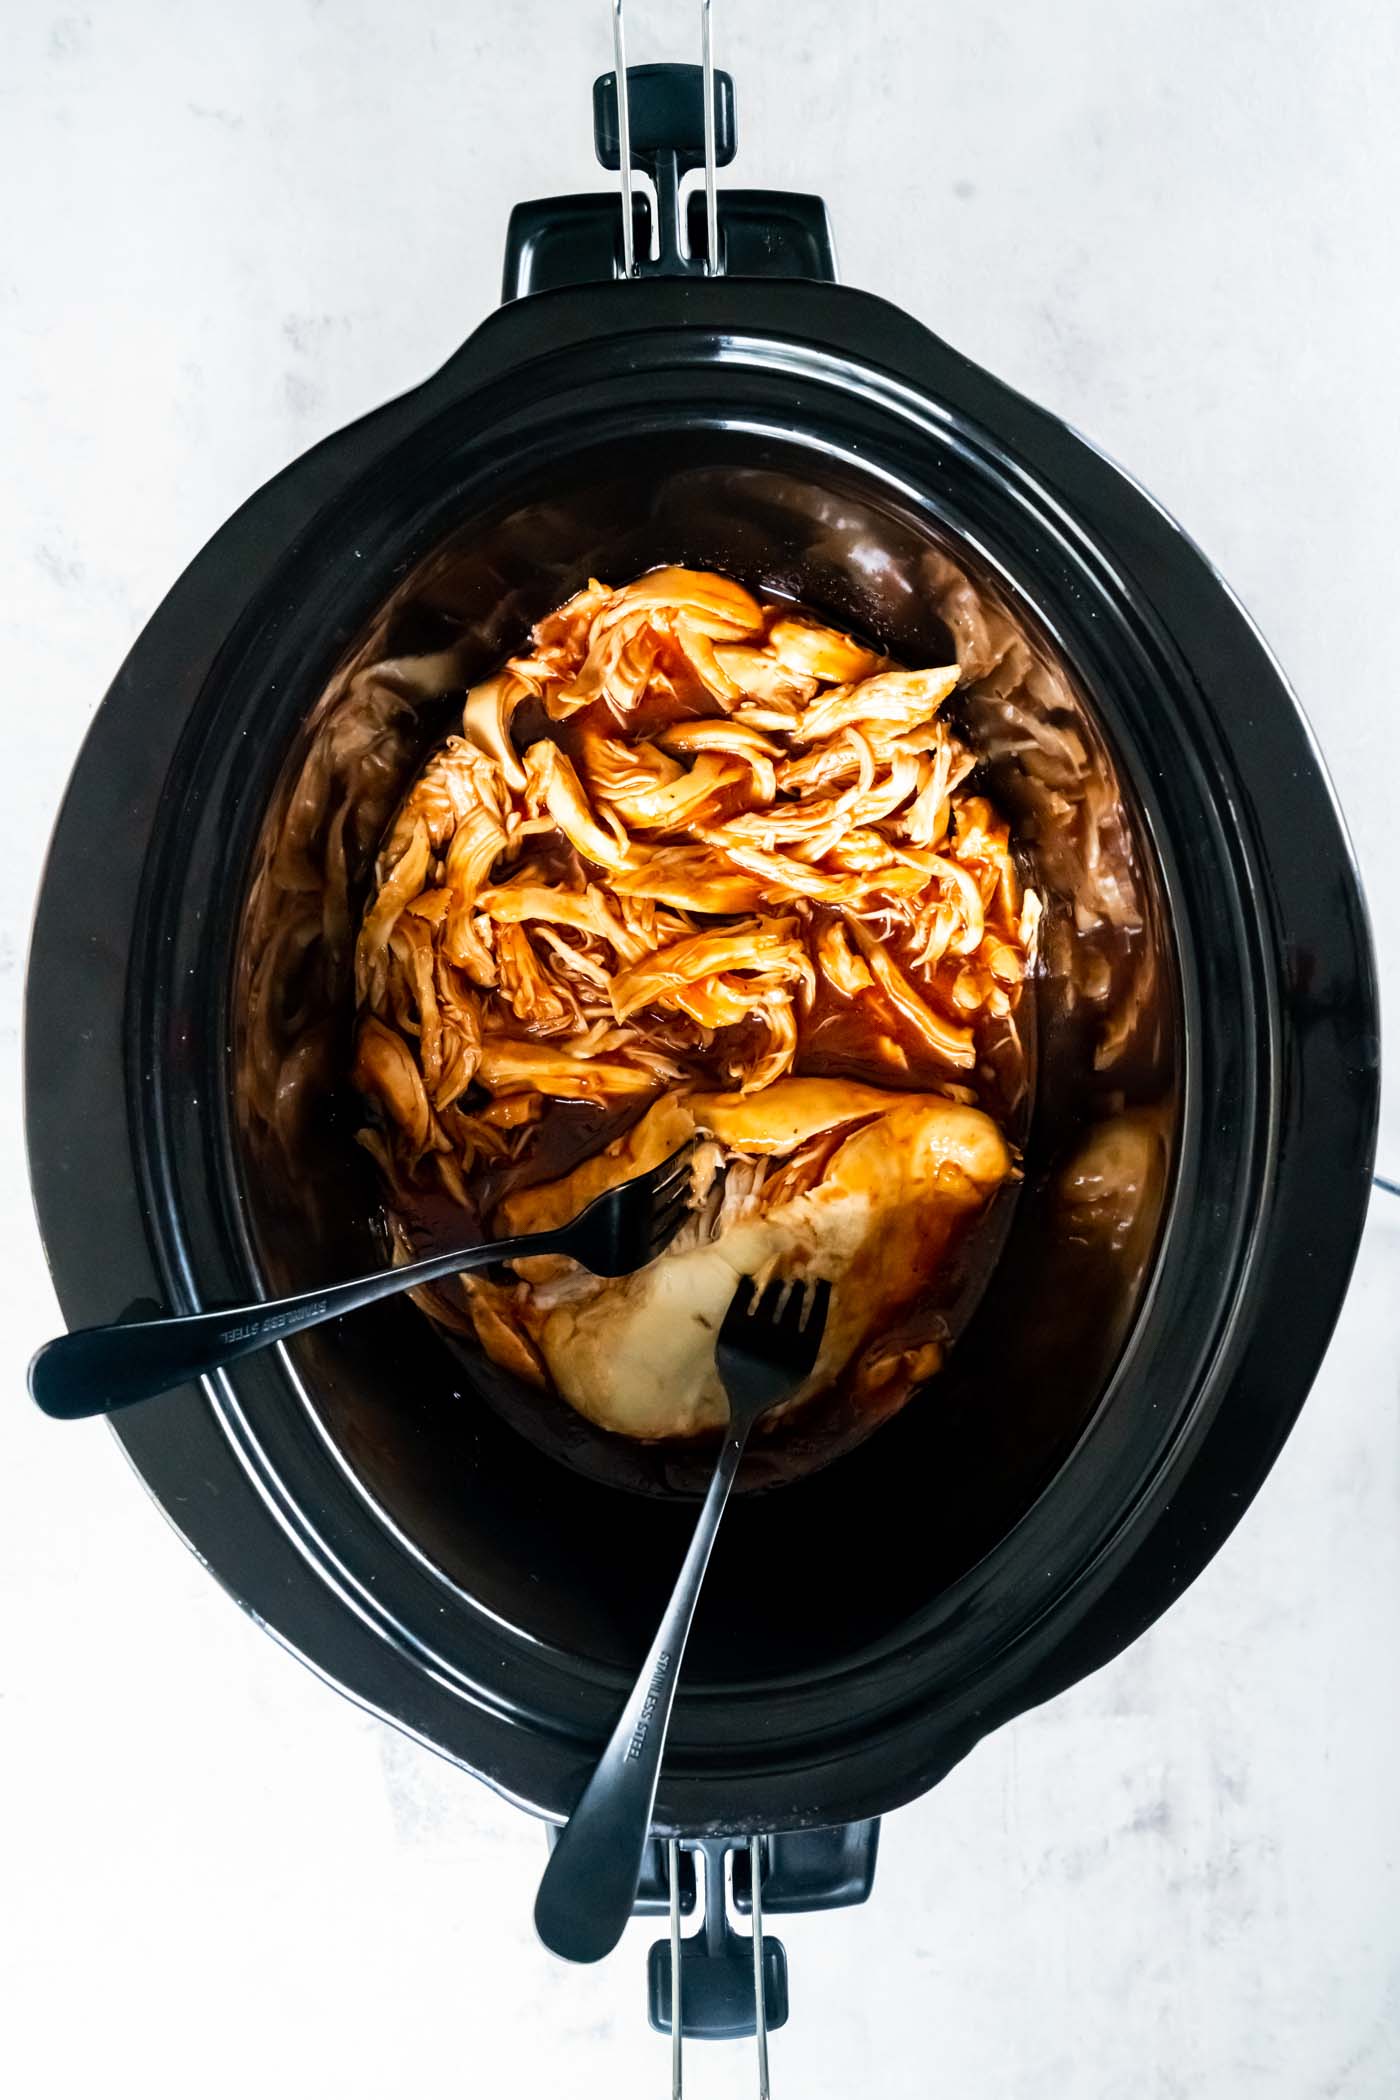 Using two forks to shred bbq chicken in slow cooker.